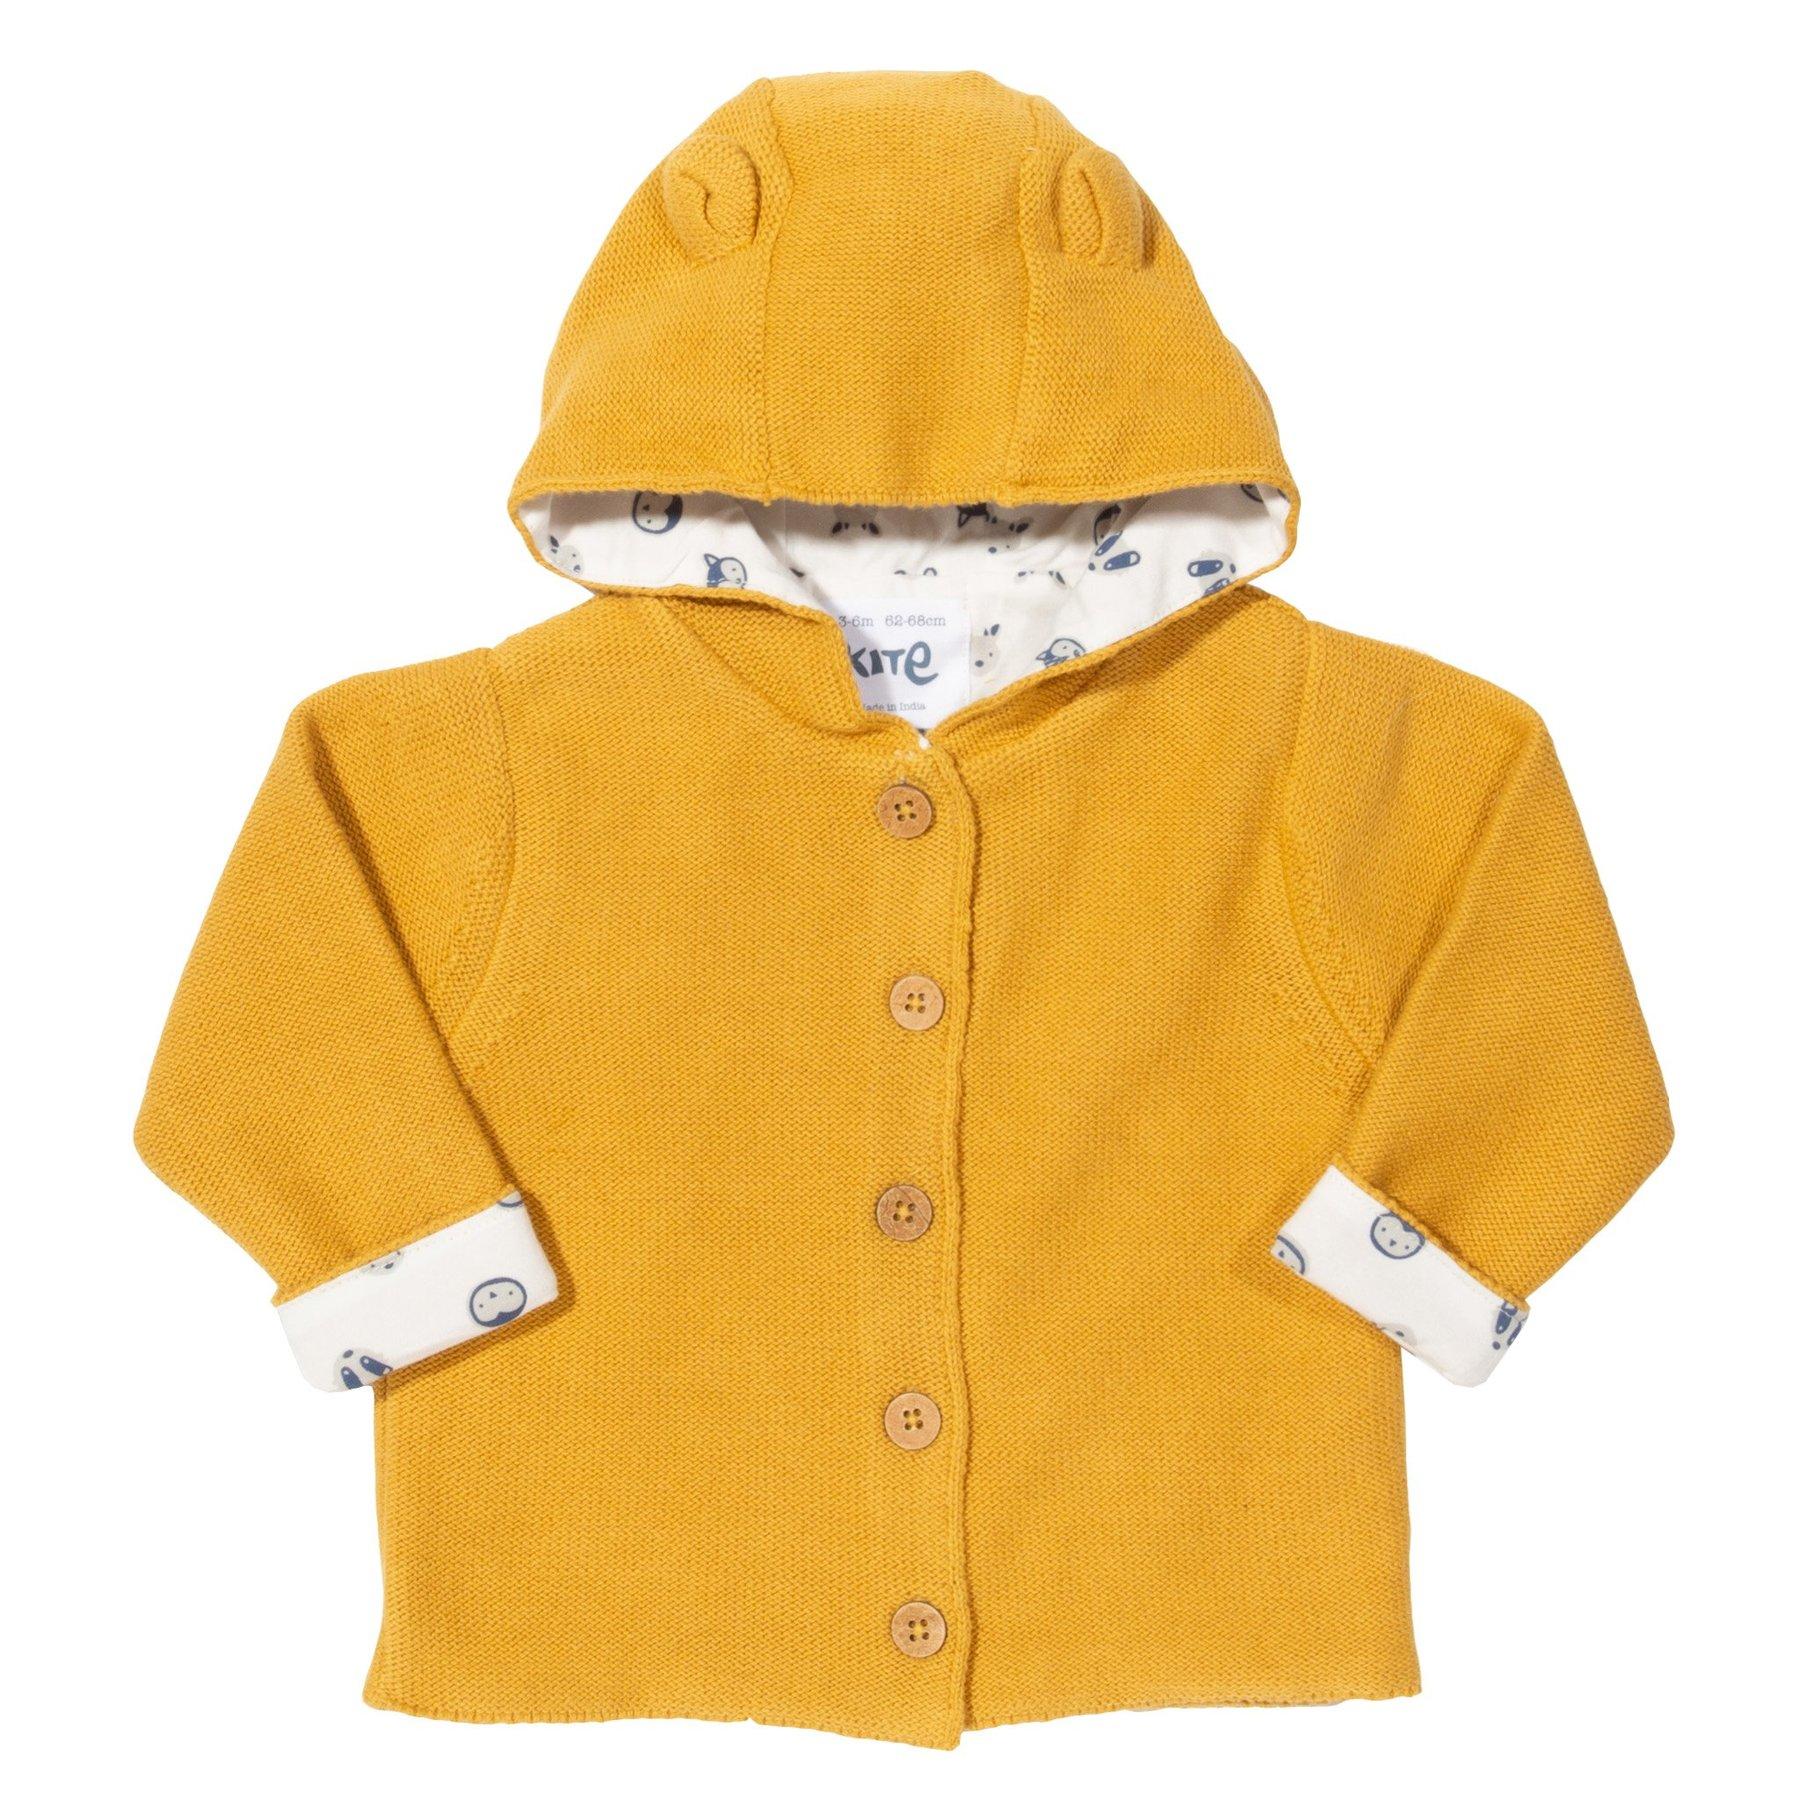 Kite Clothing Forest Friends Knit Jacket front